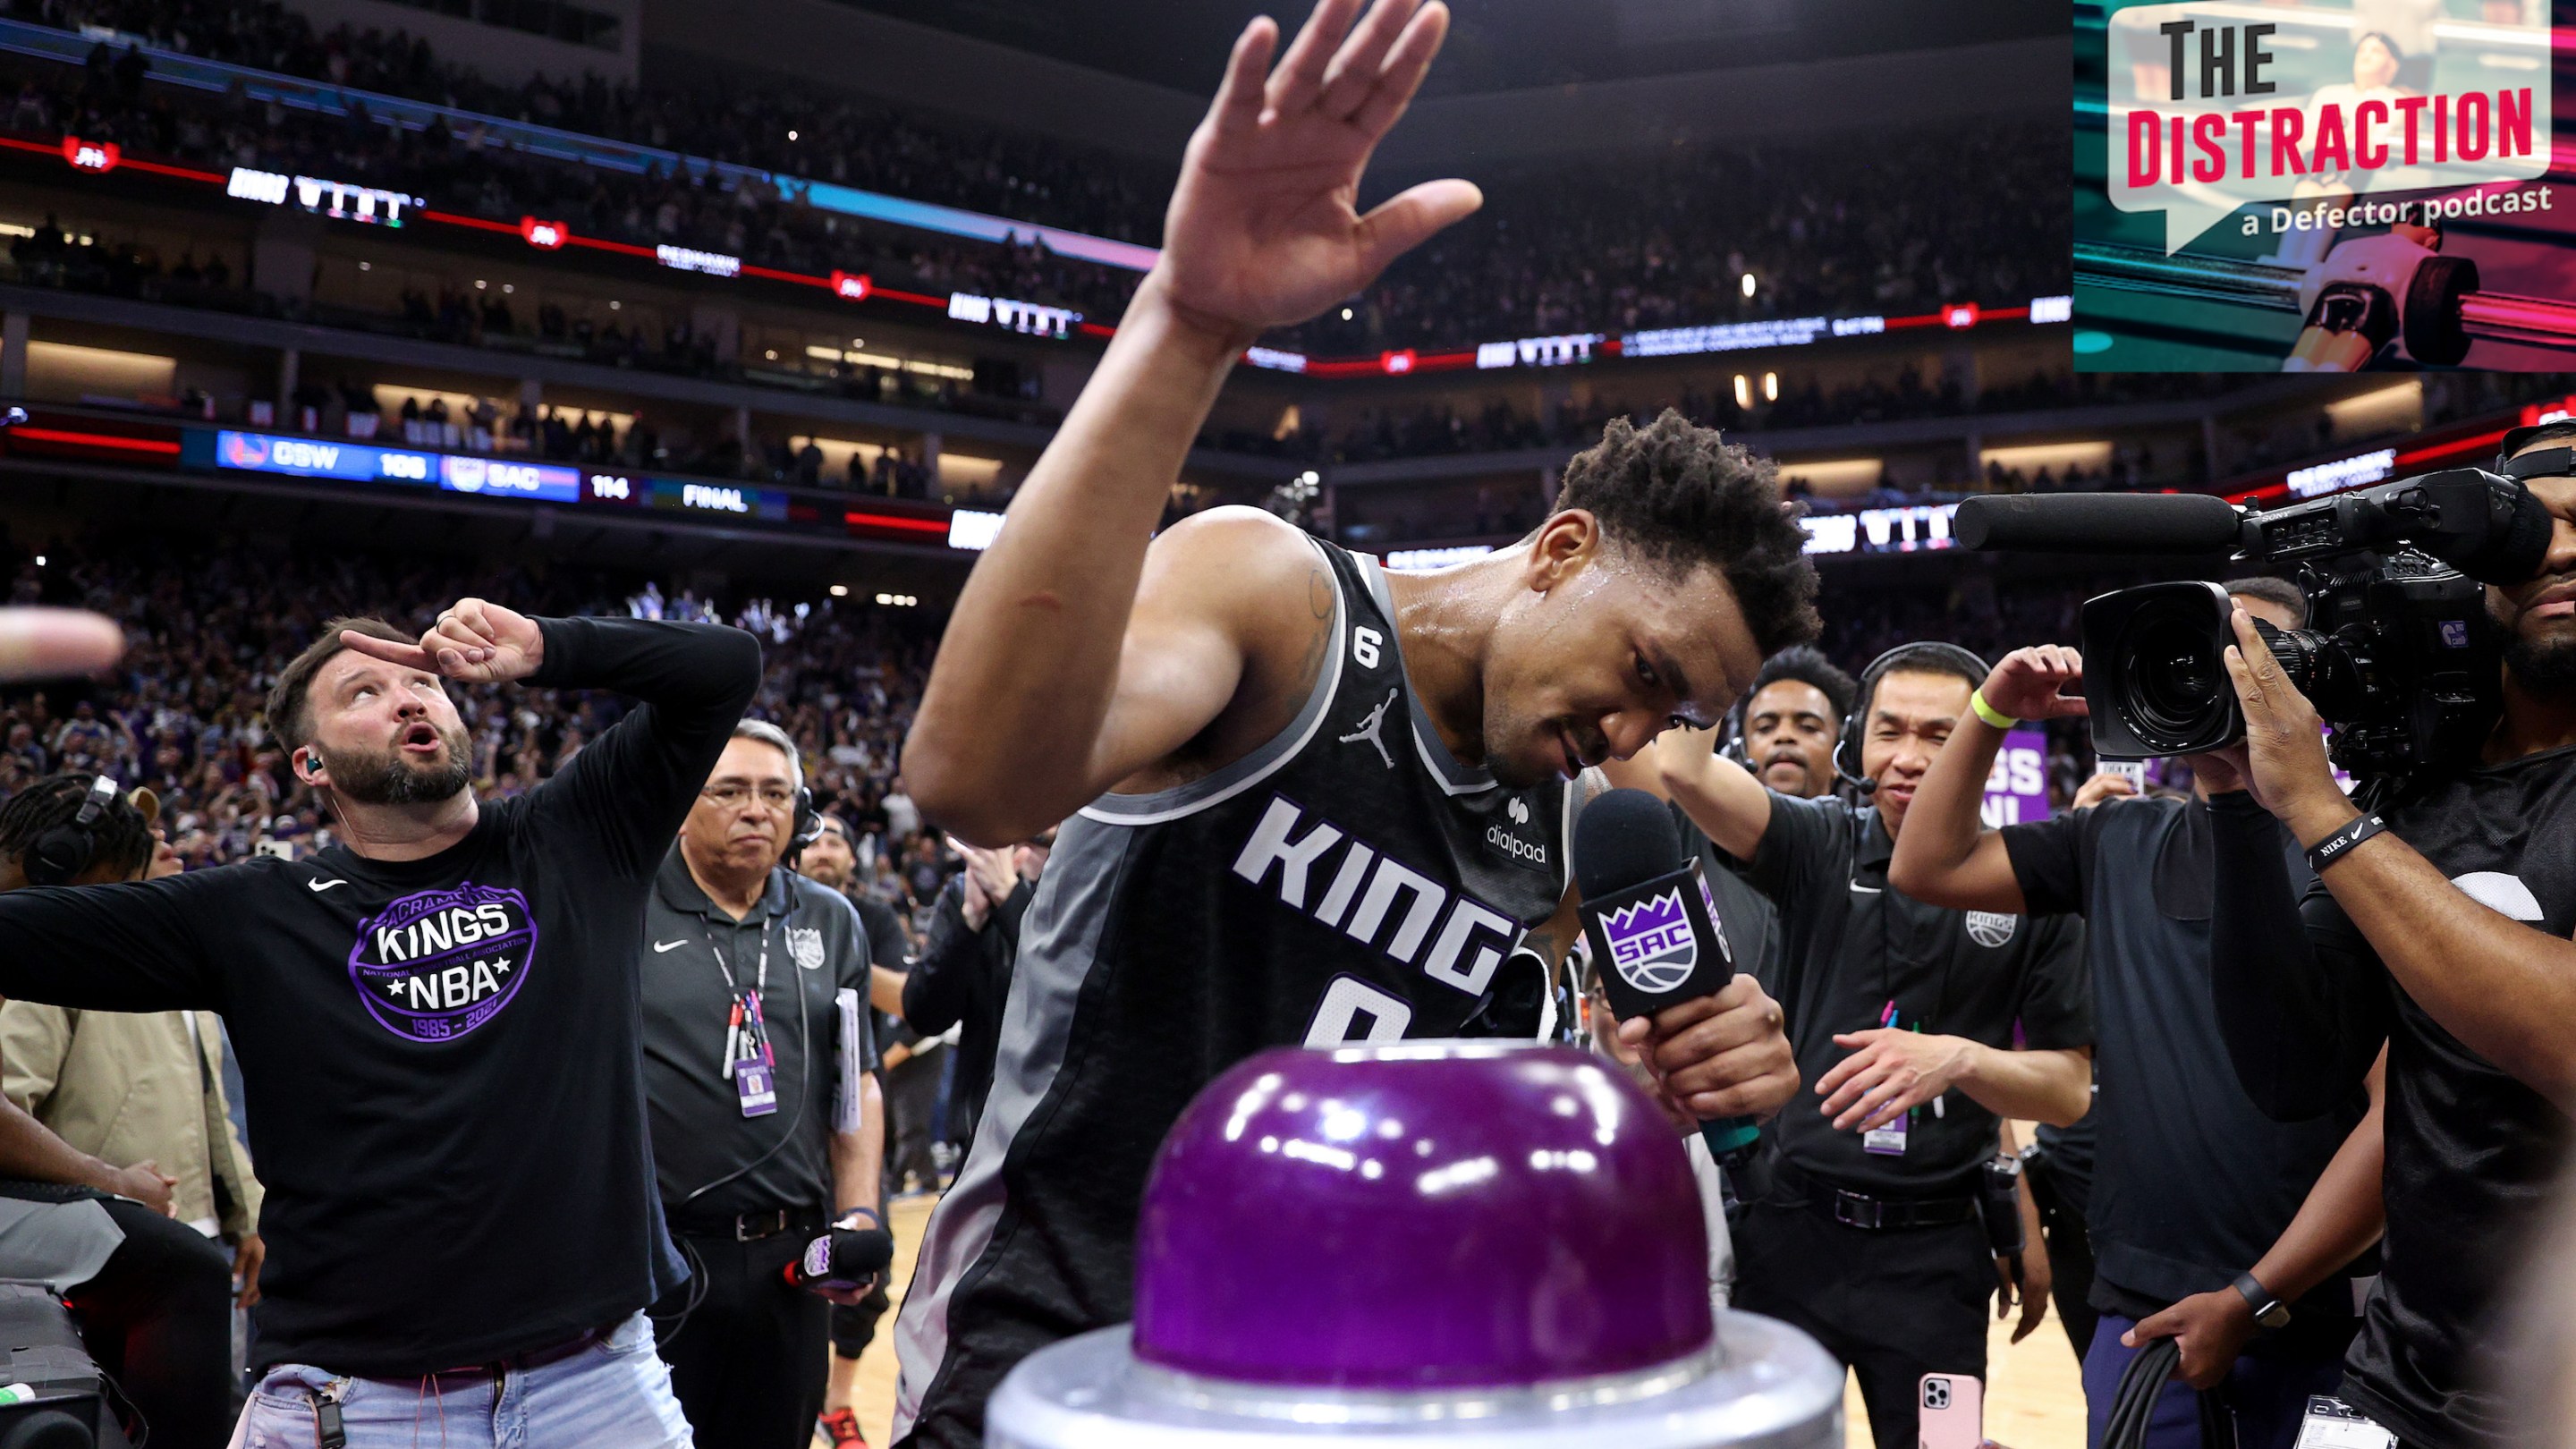 Malik Monk prepares to push the button that illuminates the beam after Sacramento's win against Golden State in Game 2 of their NBA Playoffs series.